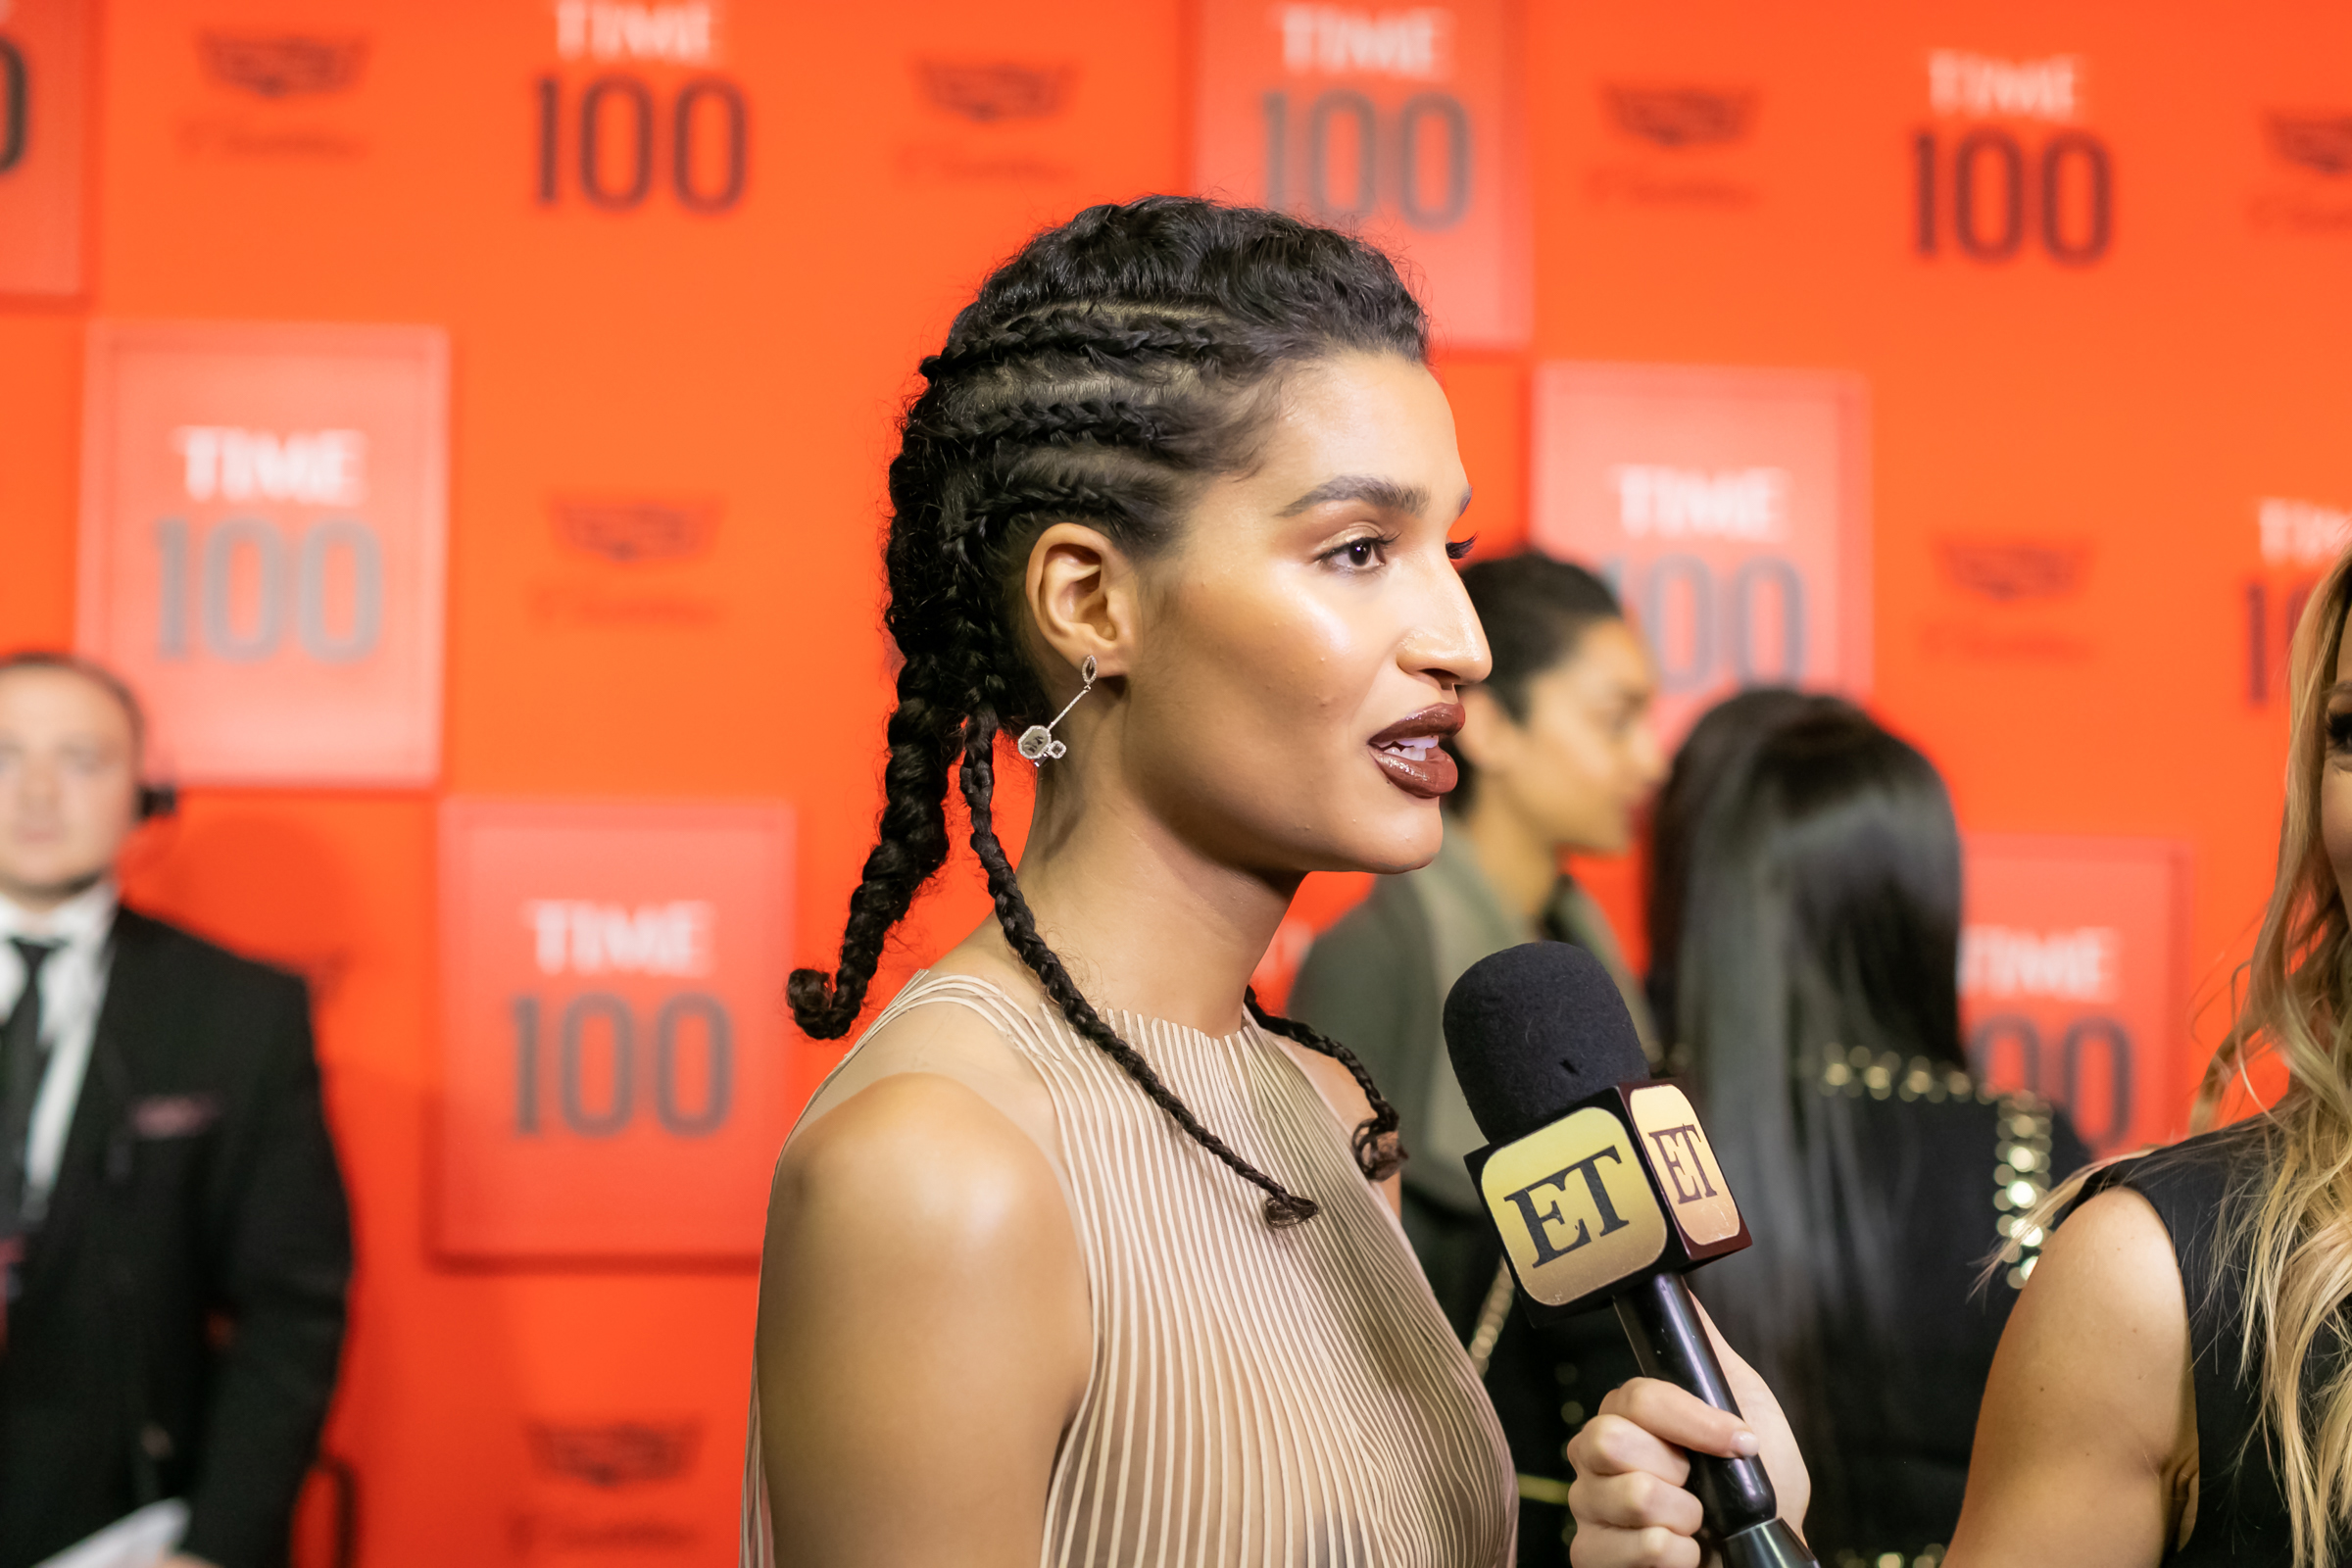 Indya Moore at the Time 100 Gala at Jazz at Lincoln Center in New York City on April 23, 2019.